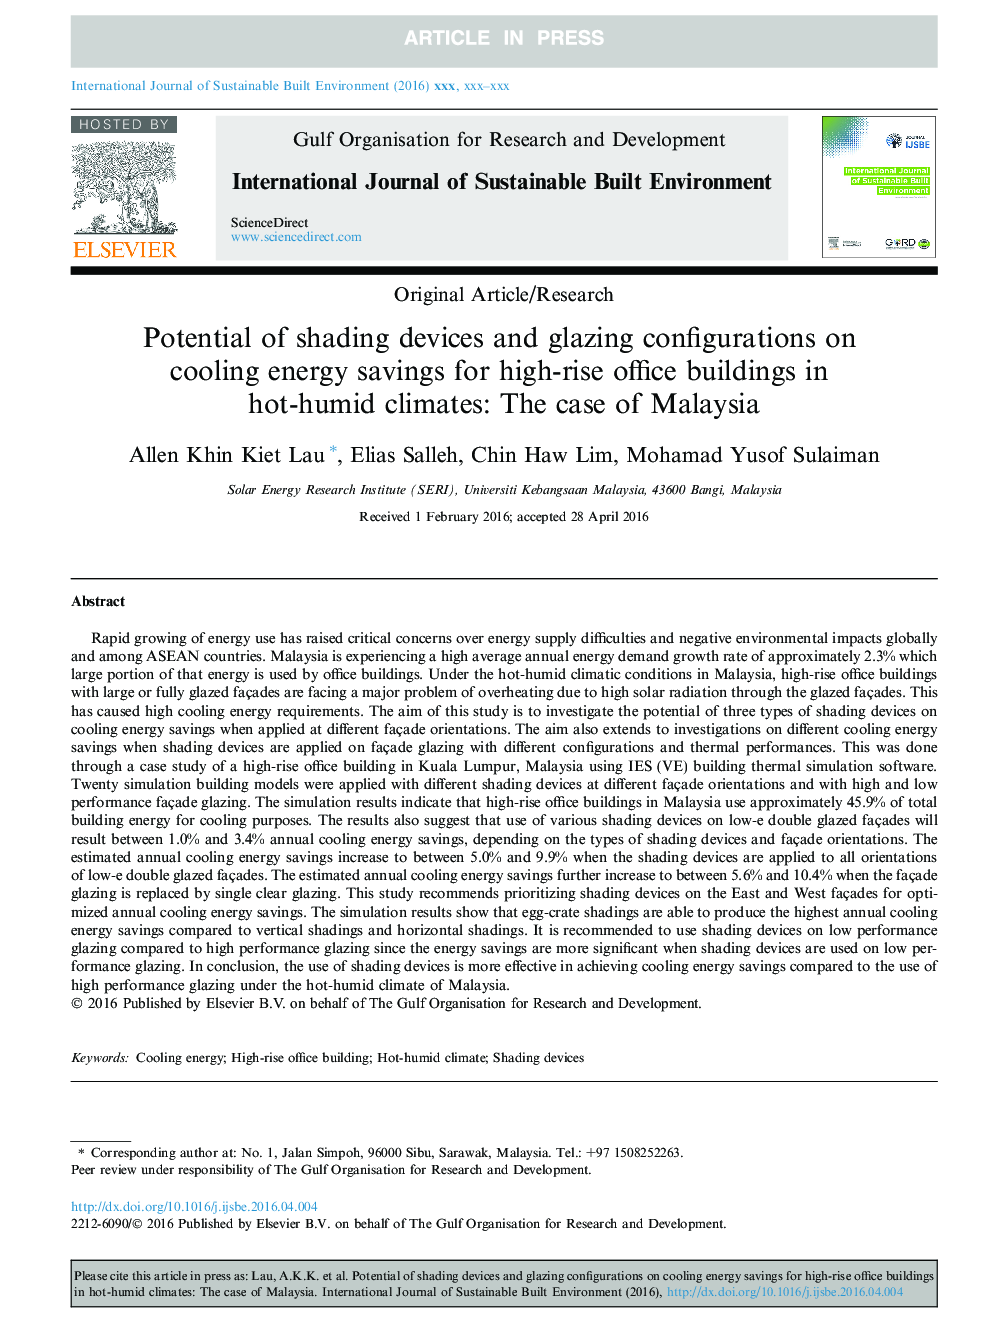 Potential of shading devices and glazing configurations on cooling energy savings for high-rise office buildings in hot-humid climates: The case of Malaysia